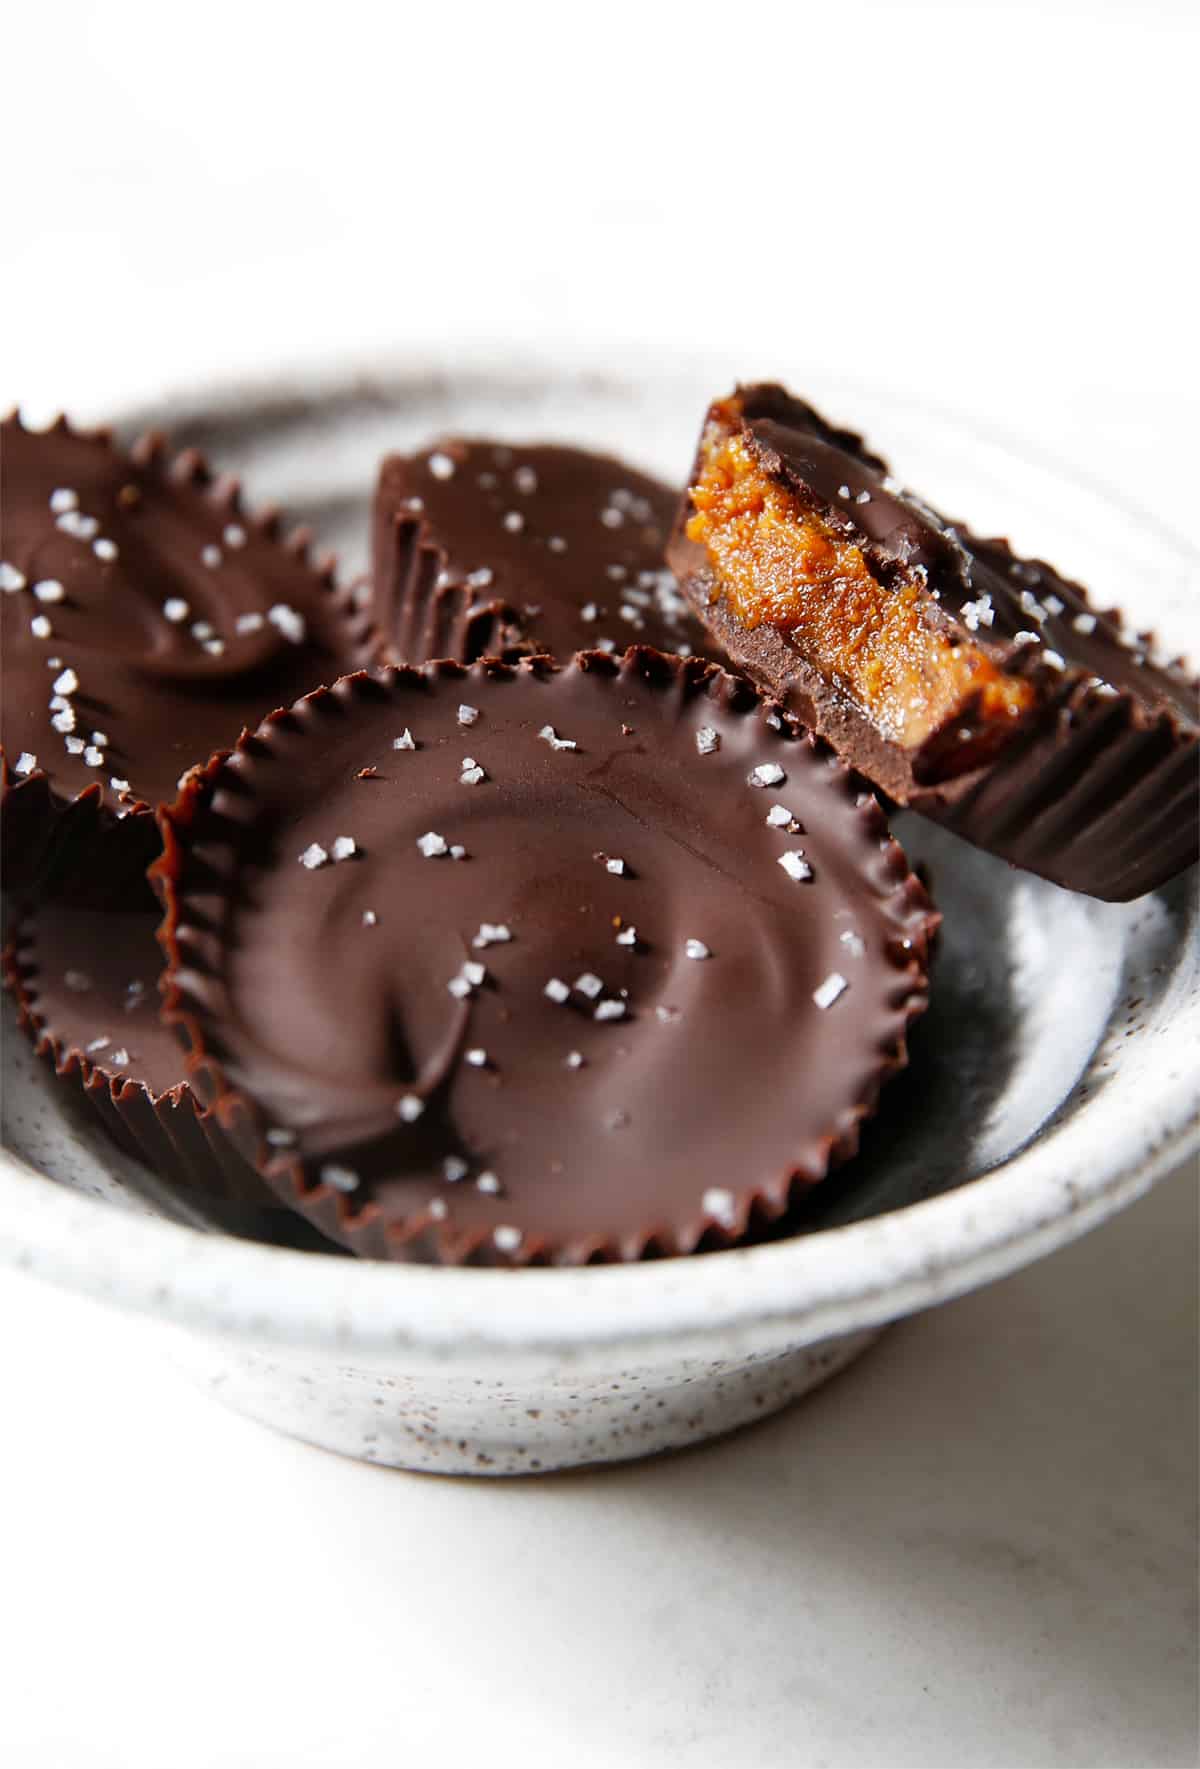 A bite from the pumpkin spice peanut butter cup